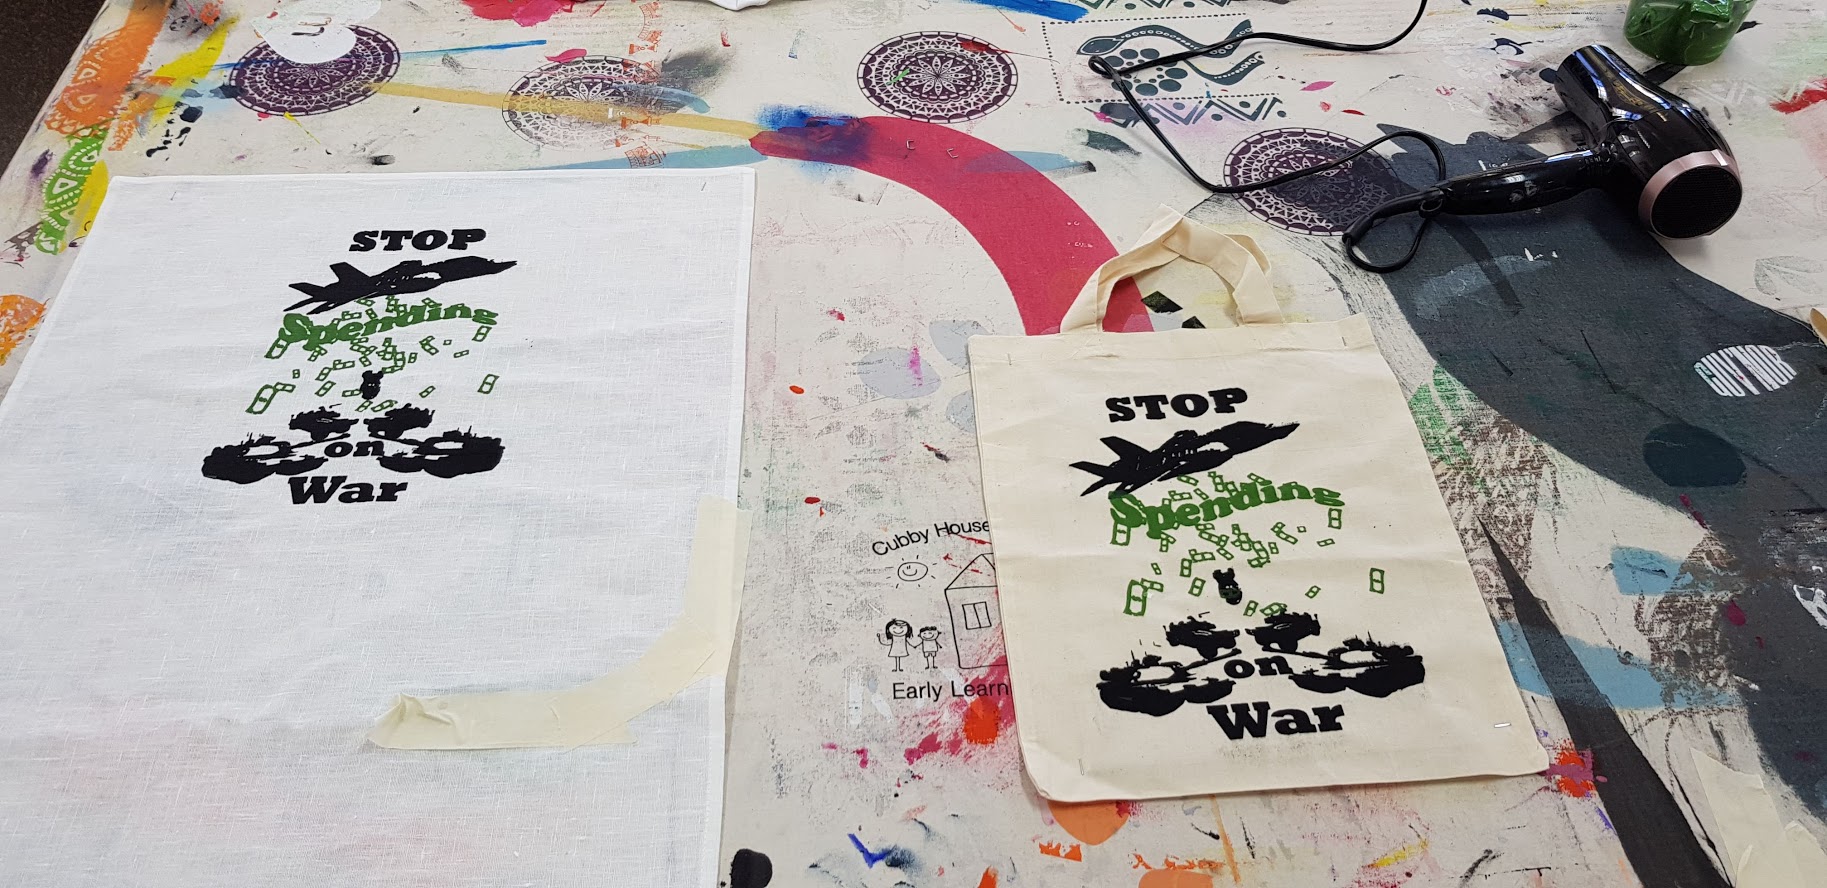 Protest Art Print on Fabric, 'Stop Spending on War'